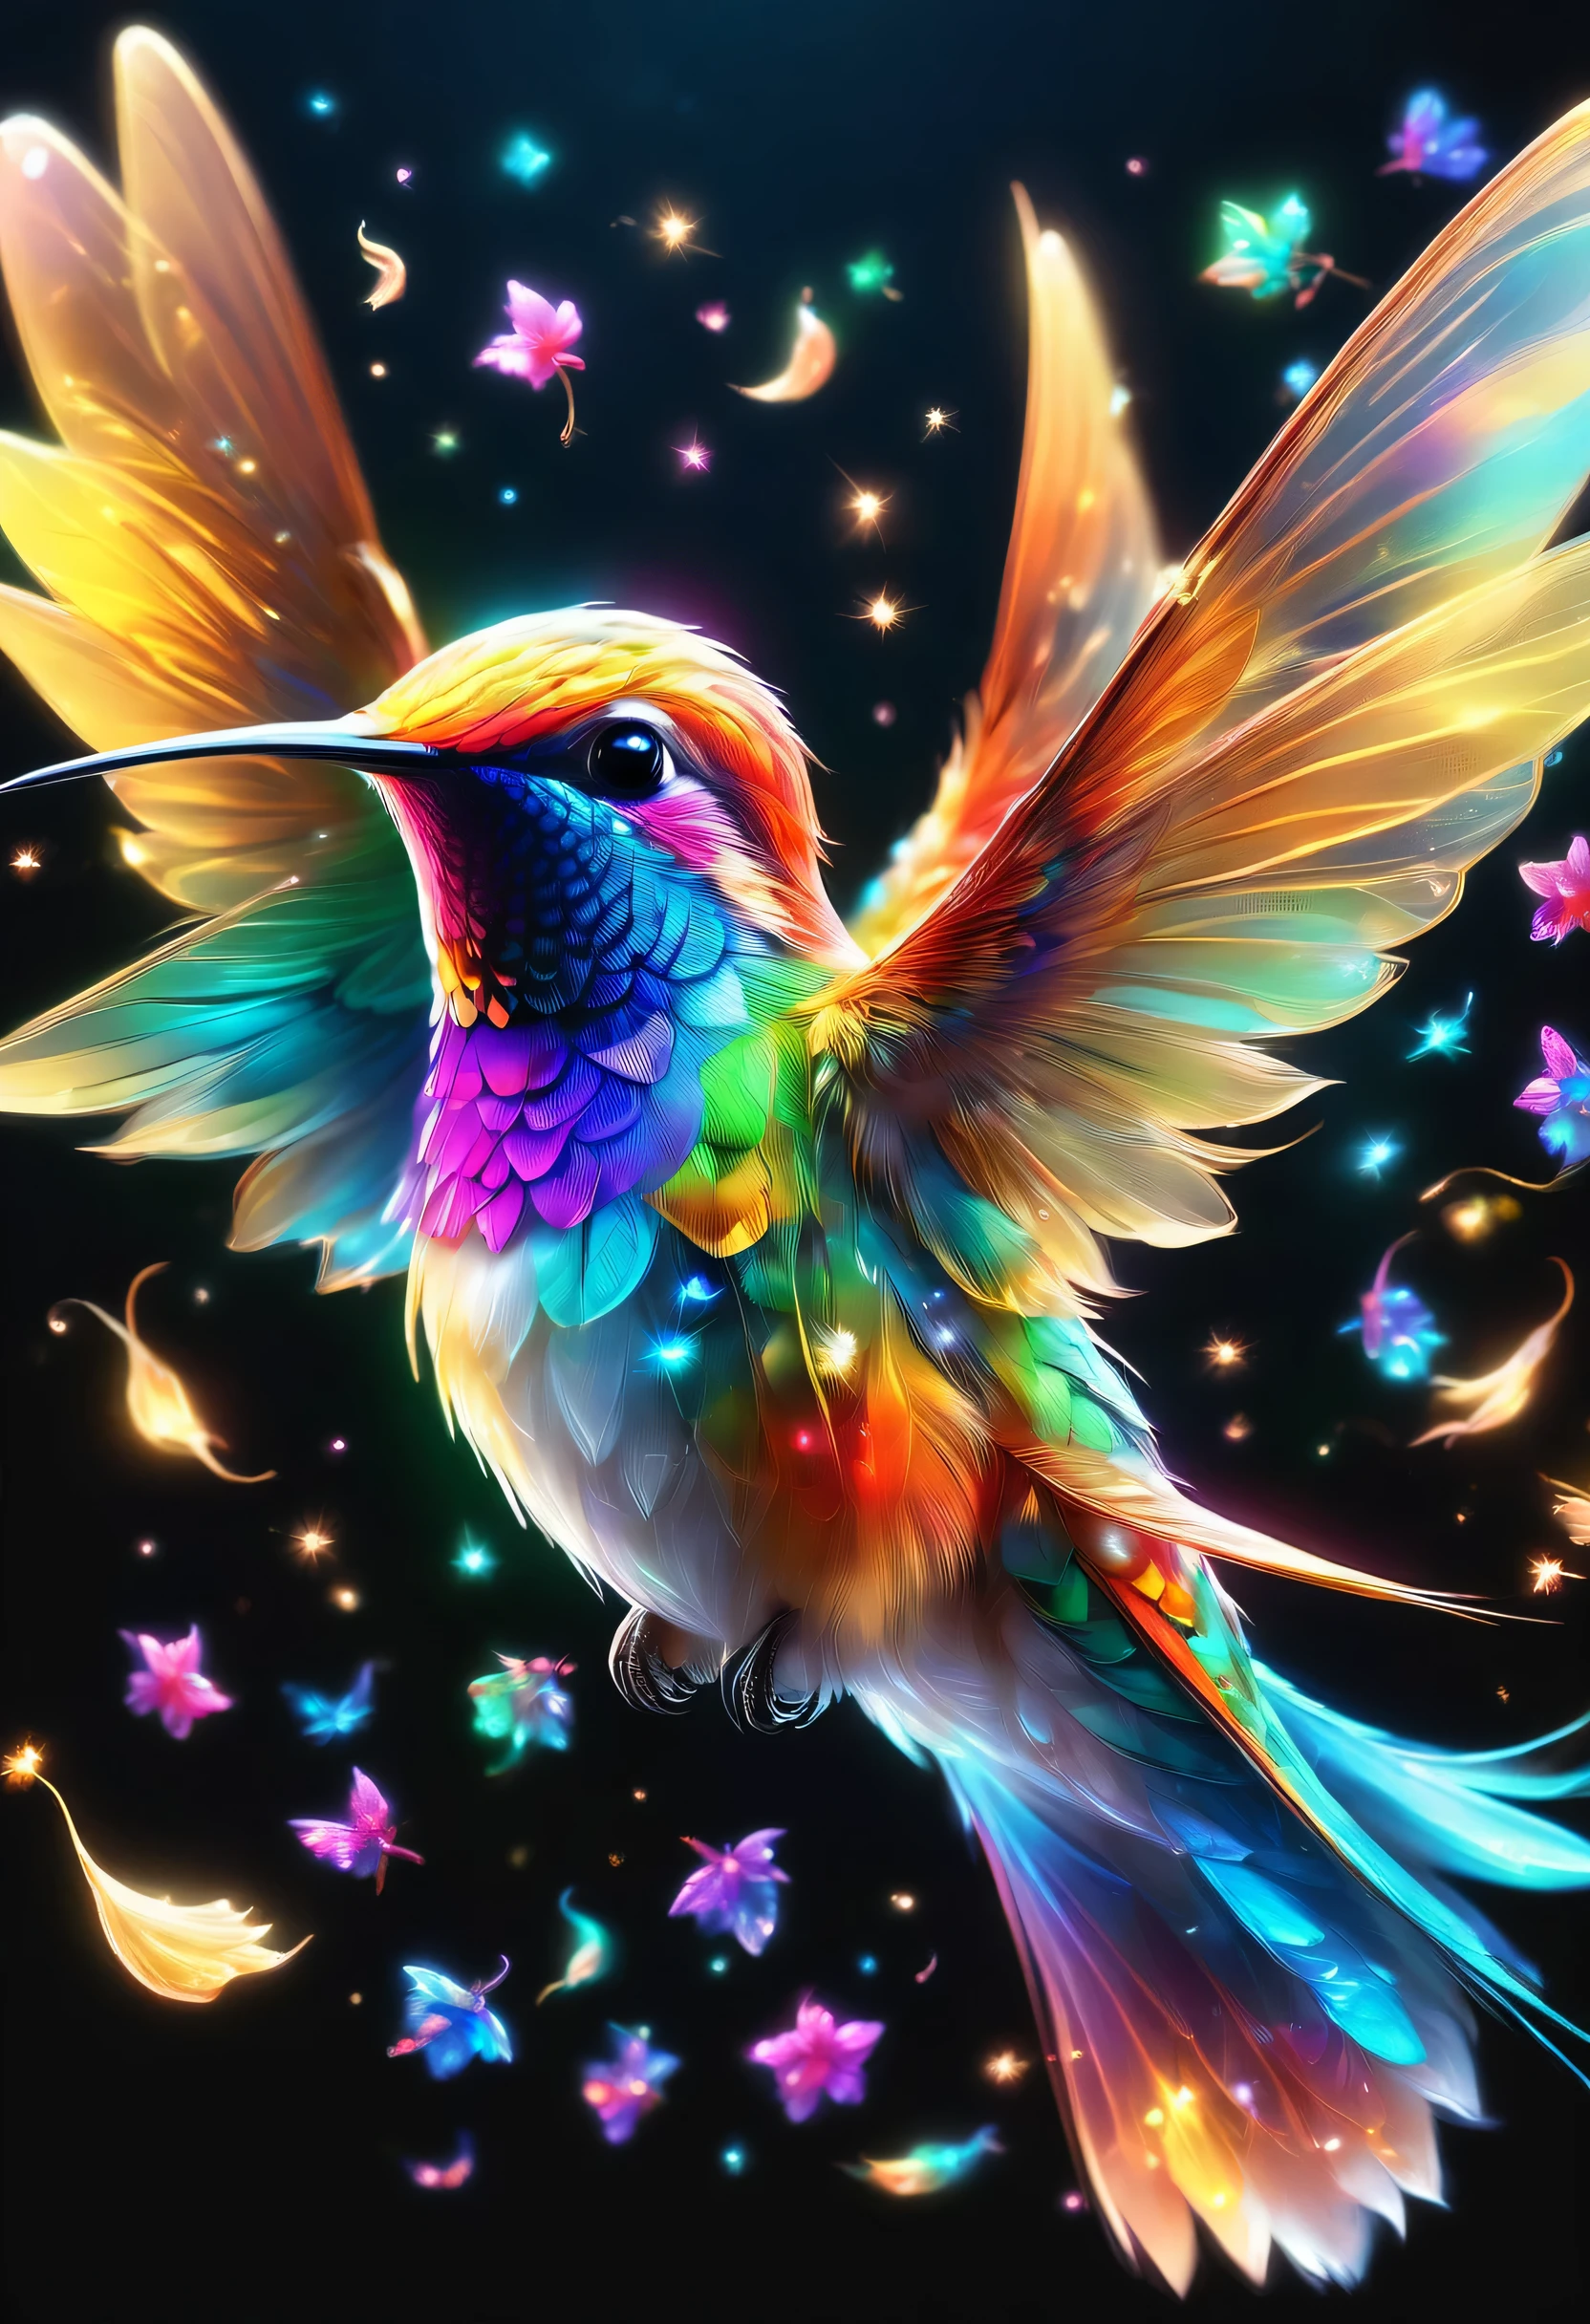 hummingbird isolated in black background,What a beautiful hummingbird,adorable,small,cute,very beautiful,rendering,realism,dream-like,magic essence,rich colors,Cast colorful spells,masterpiece,最高masterpiece,highest quality,8k,be familiar withなディティール,In detail,flash,とてもflash,reflection,Vibrant colors,be familiar with,delicately